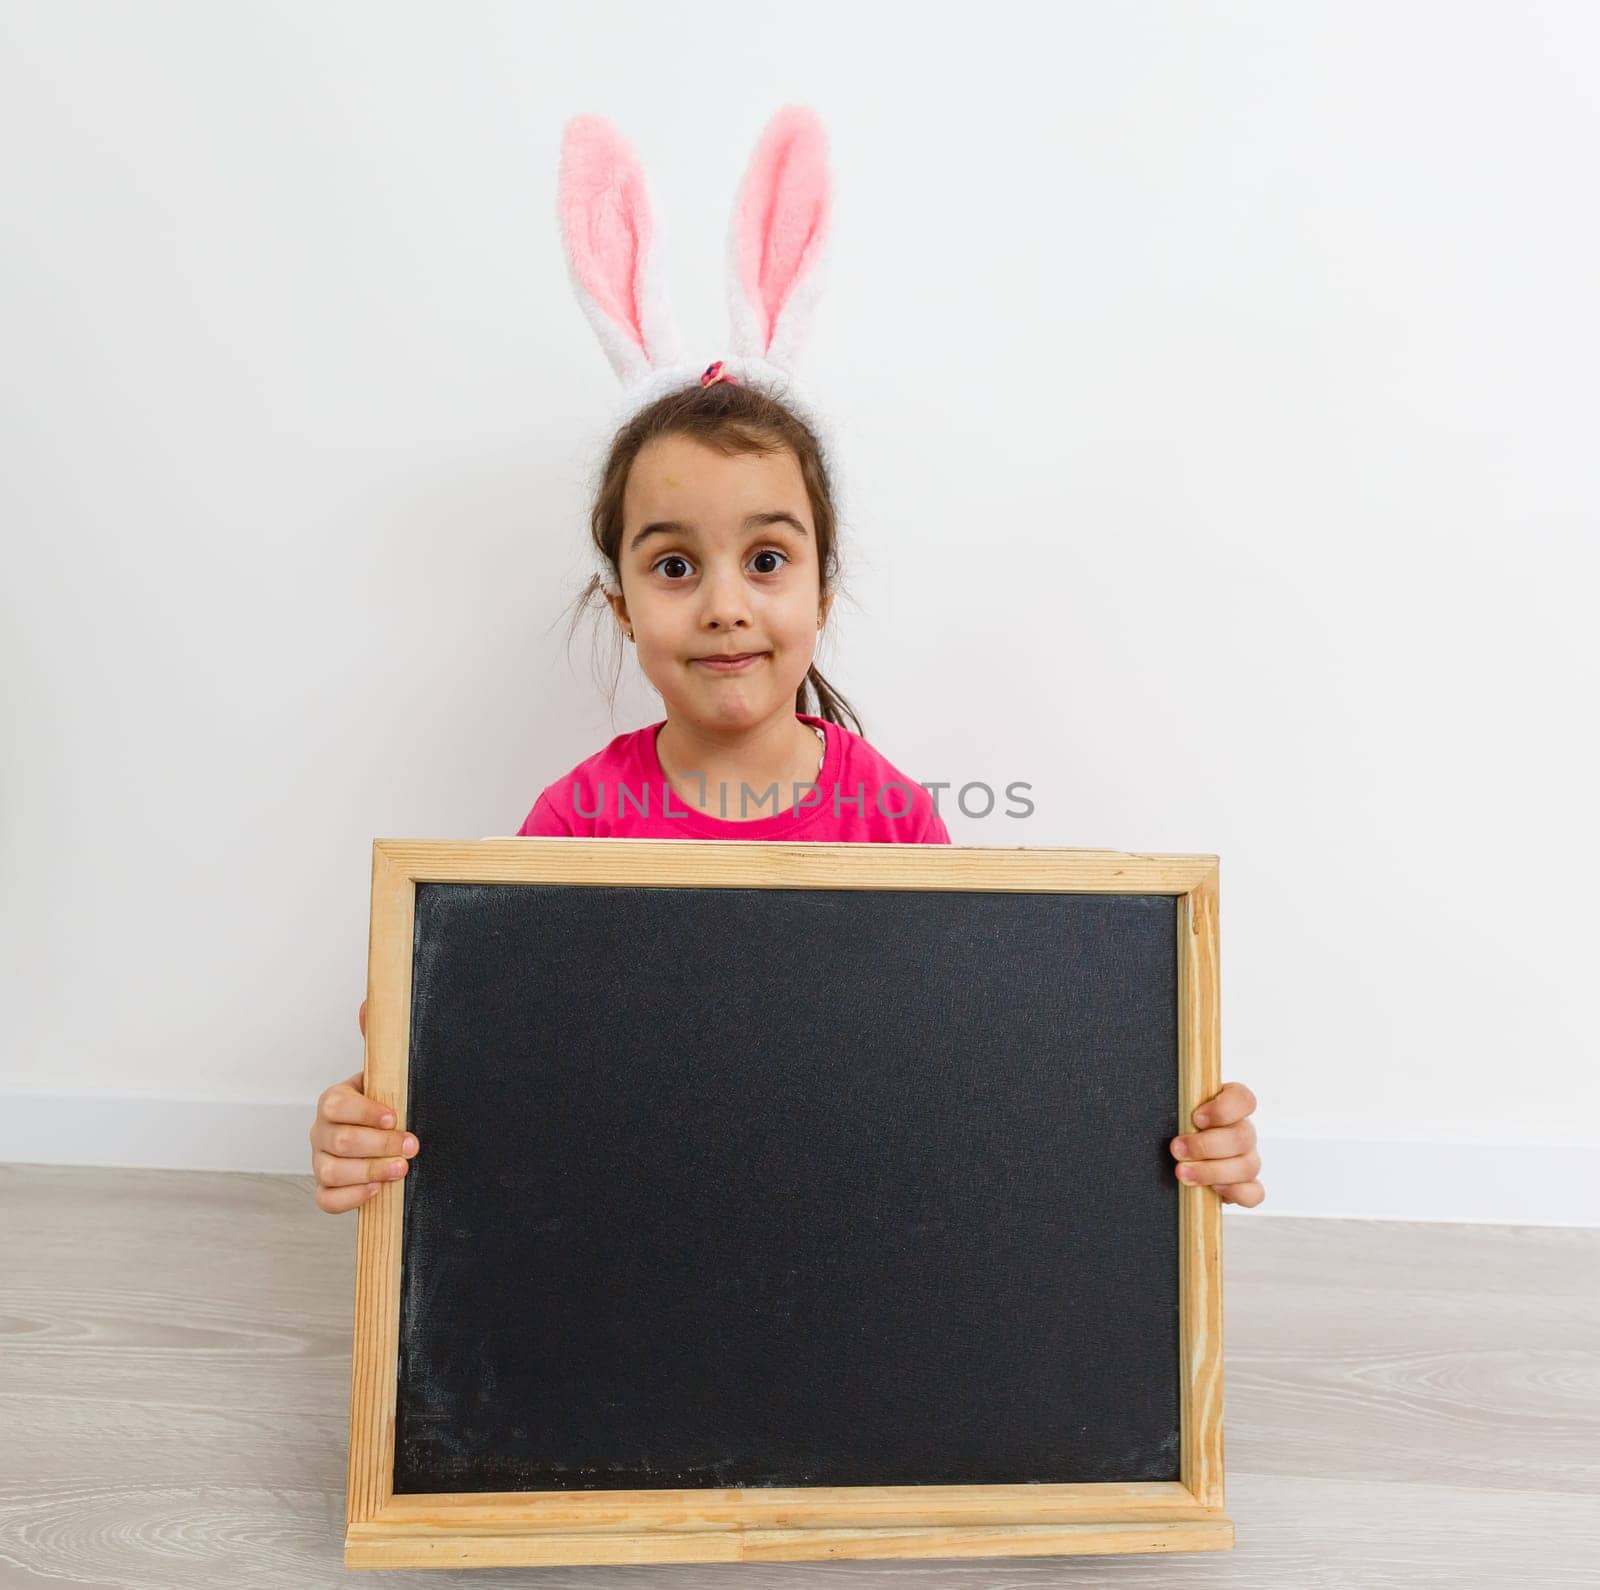 Very angry little girl wearing bunny ears sitting on a floor at home